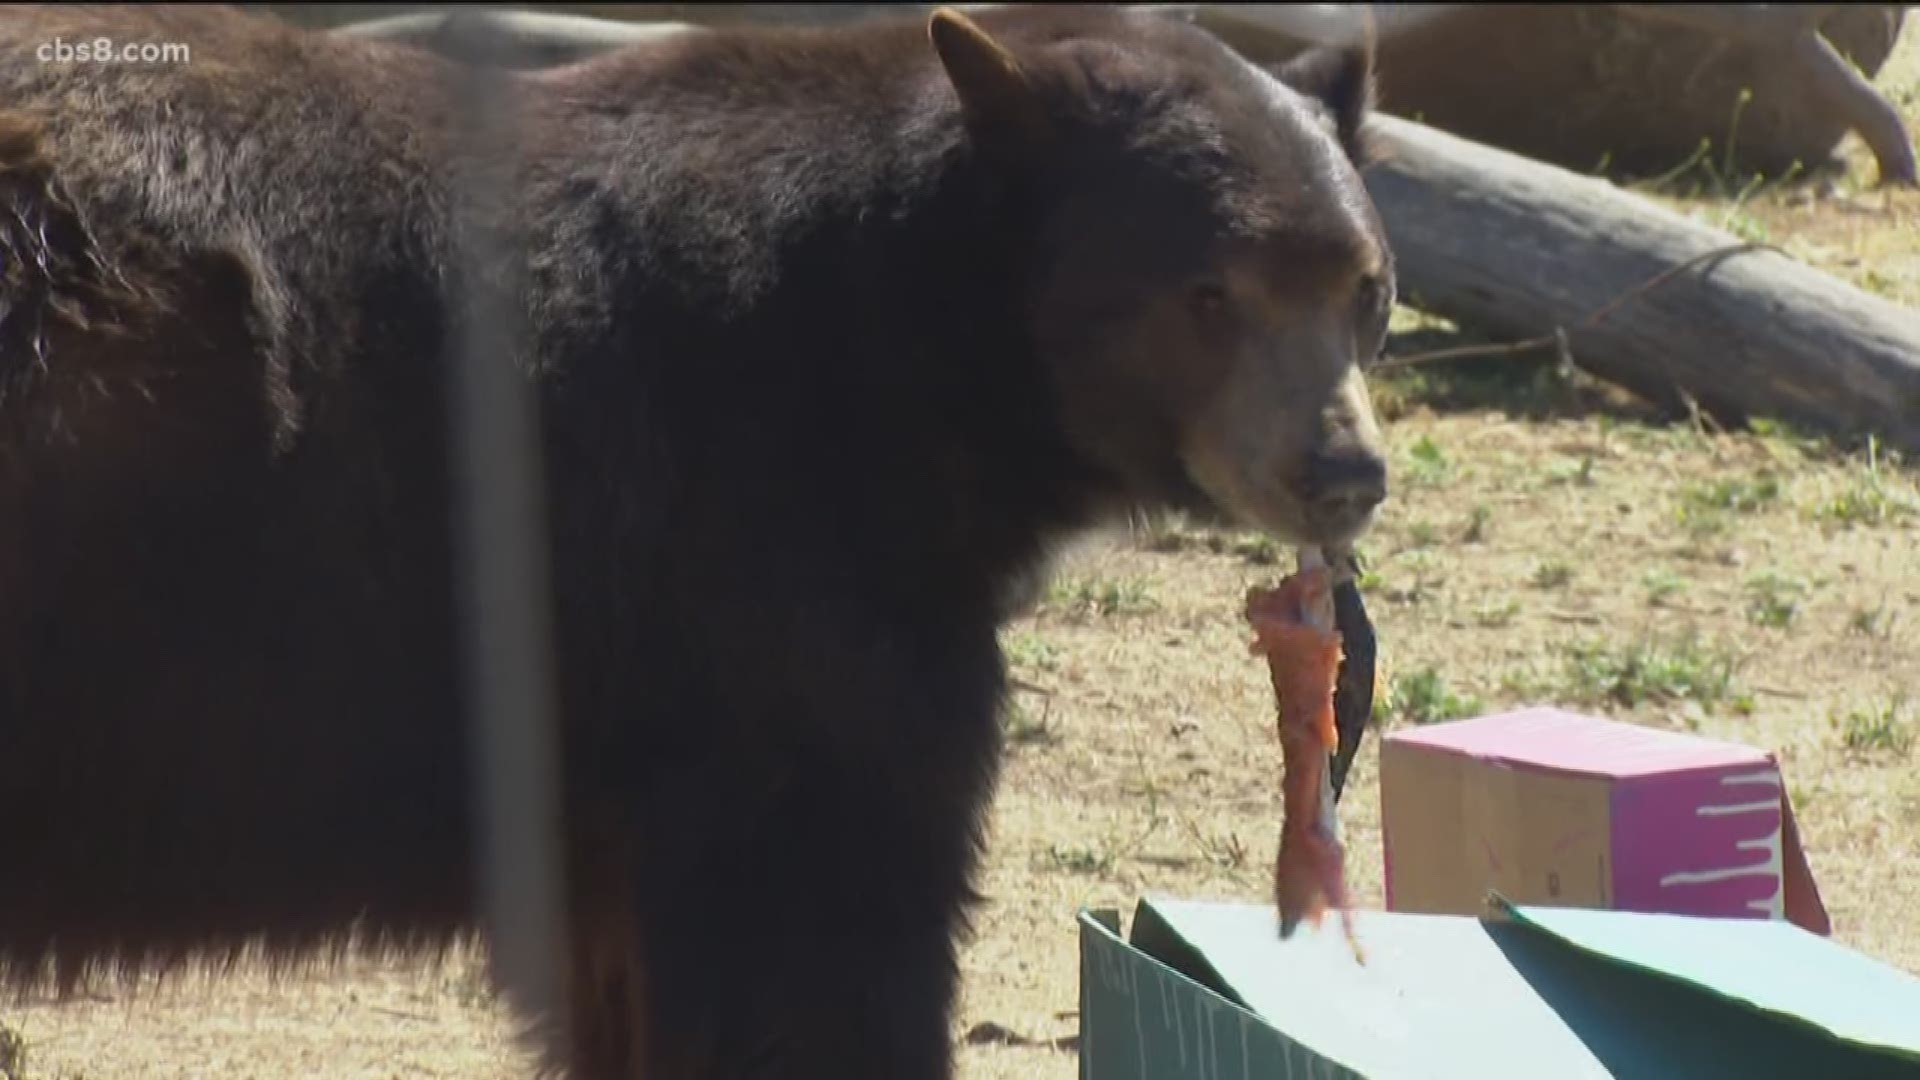 The popular bear got his name after he was caught eating Costco meatballs while wandering through downtown Los Angeles neighborhoods.